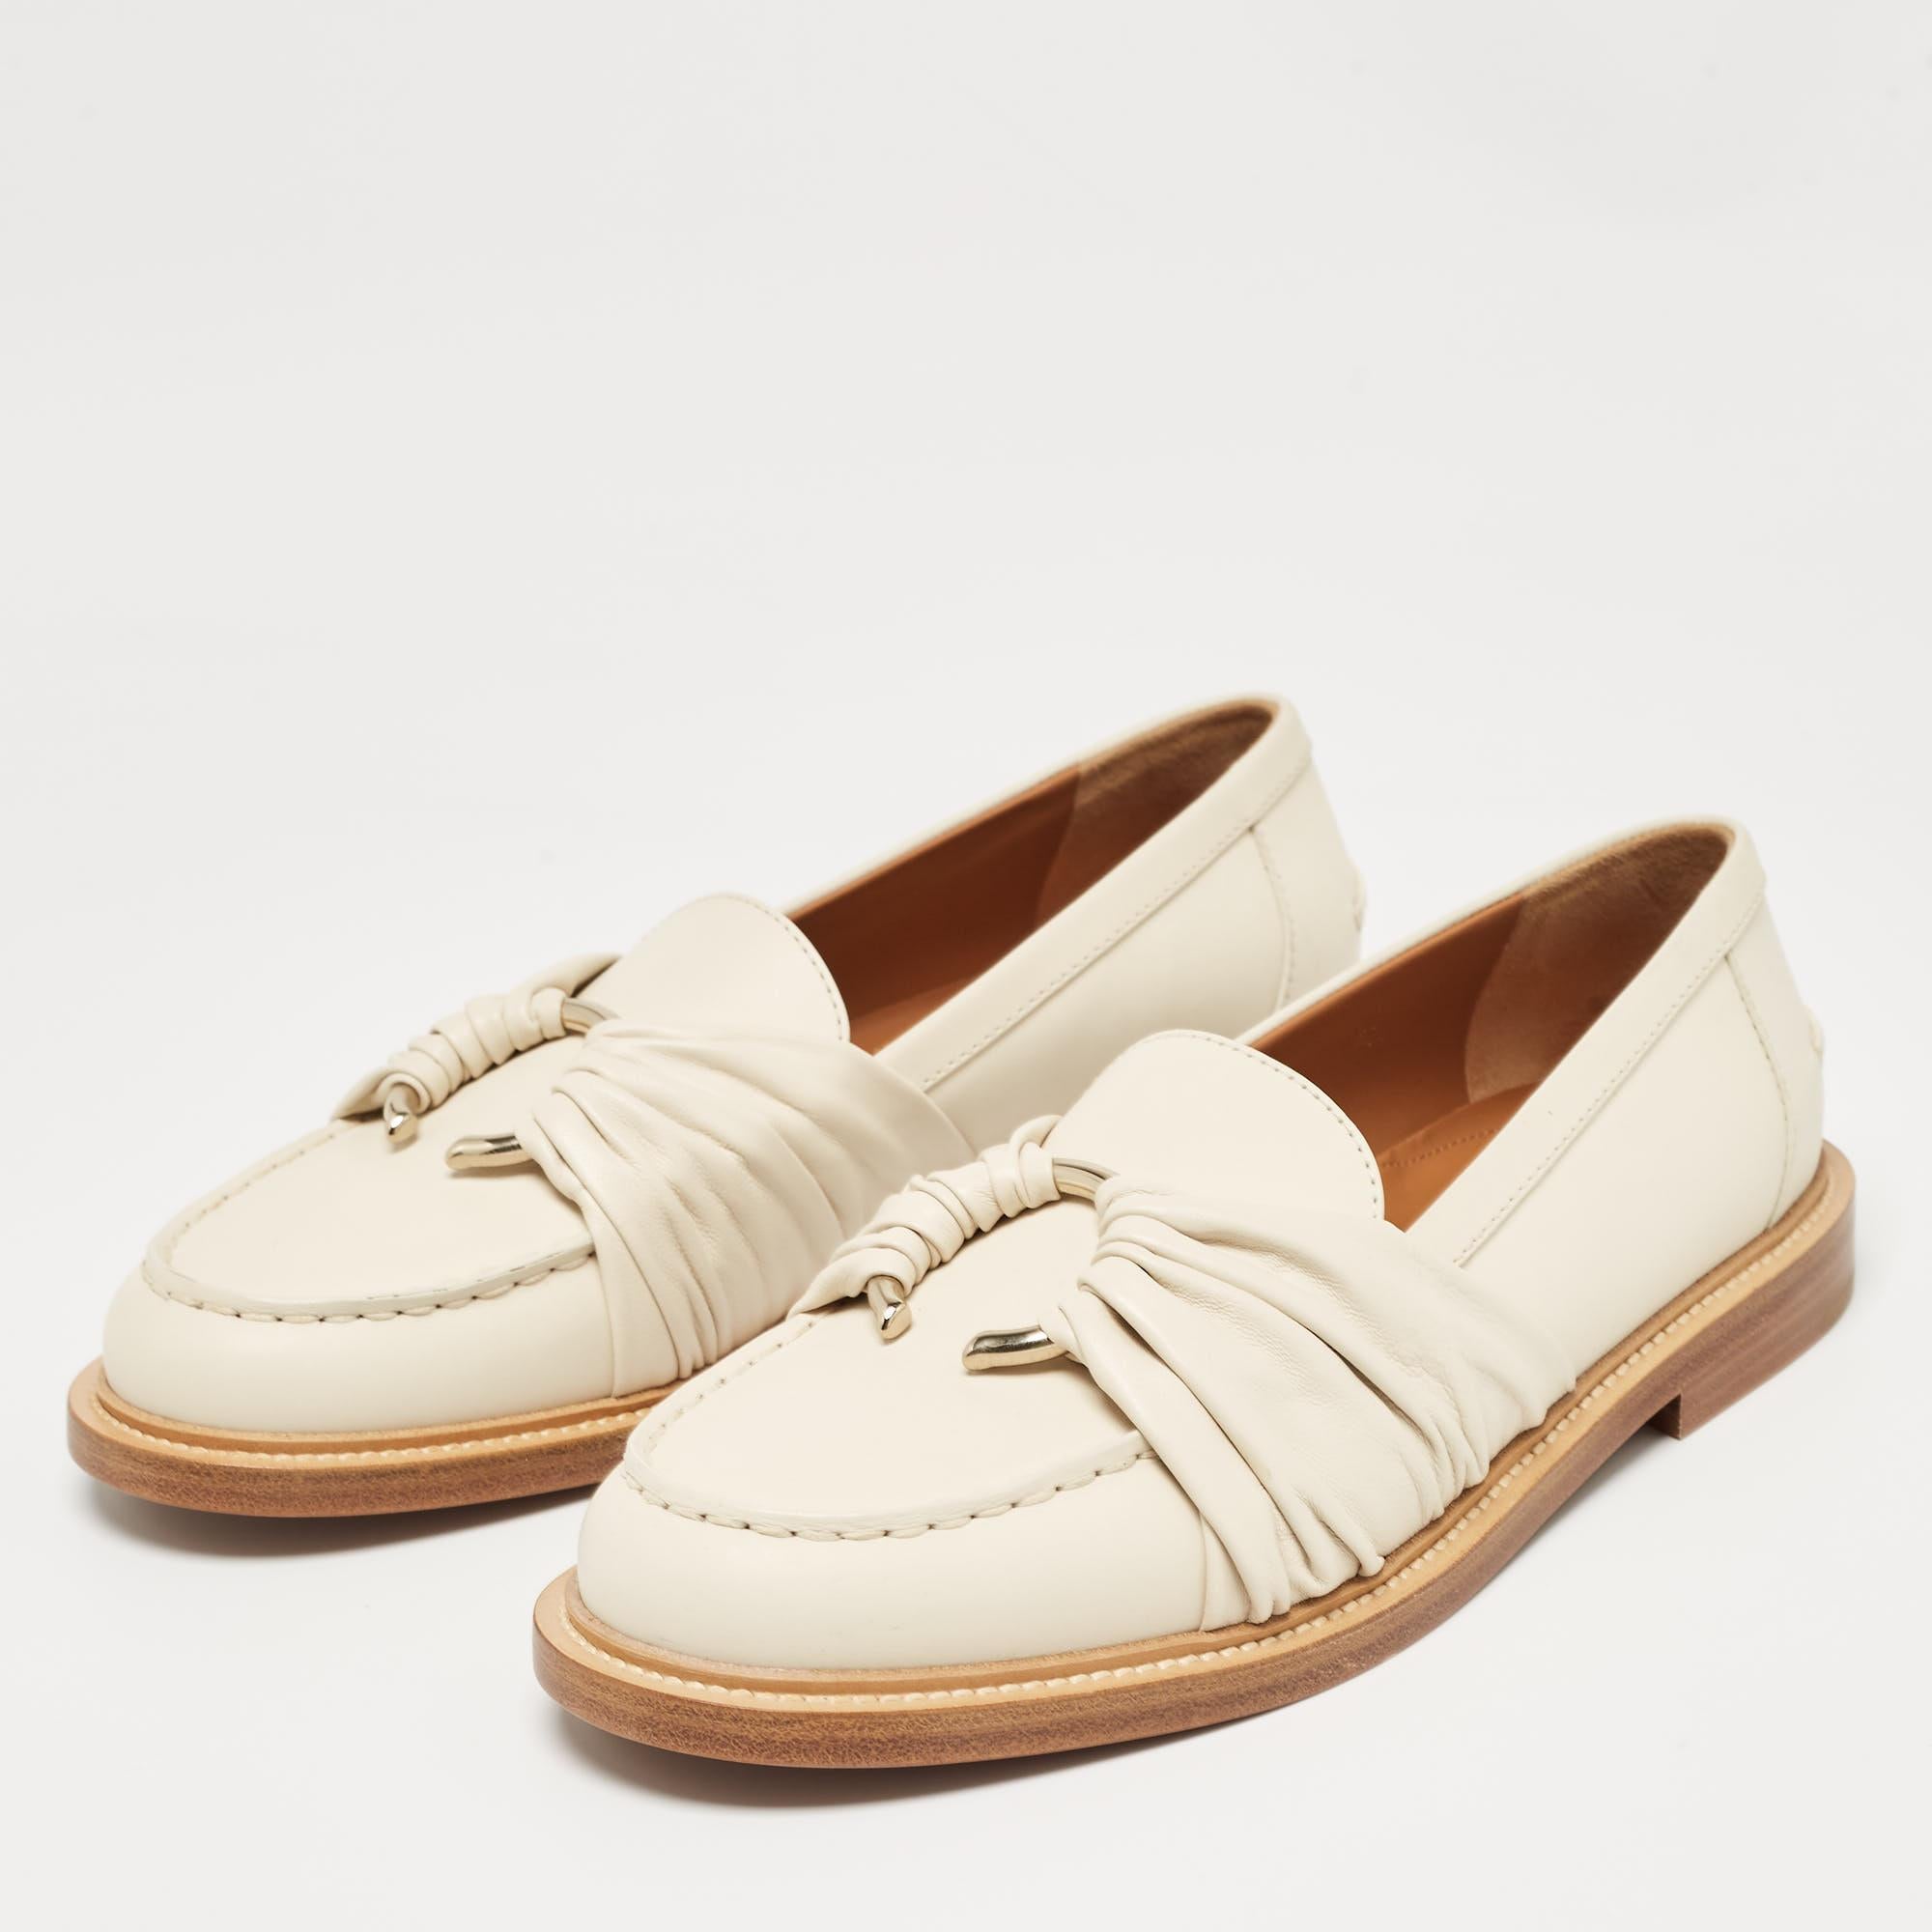 Chloe Cream Leather C Logo Loafers Size 40 For Sale 2